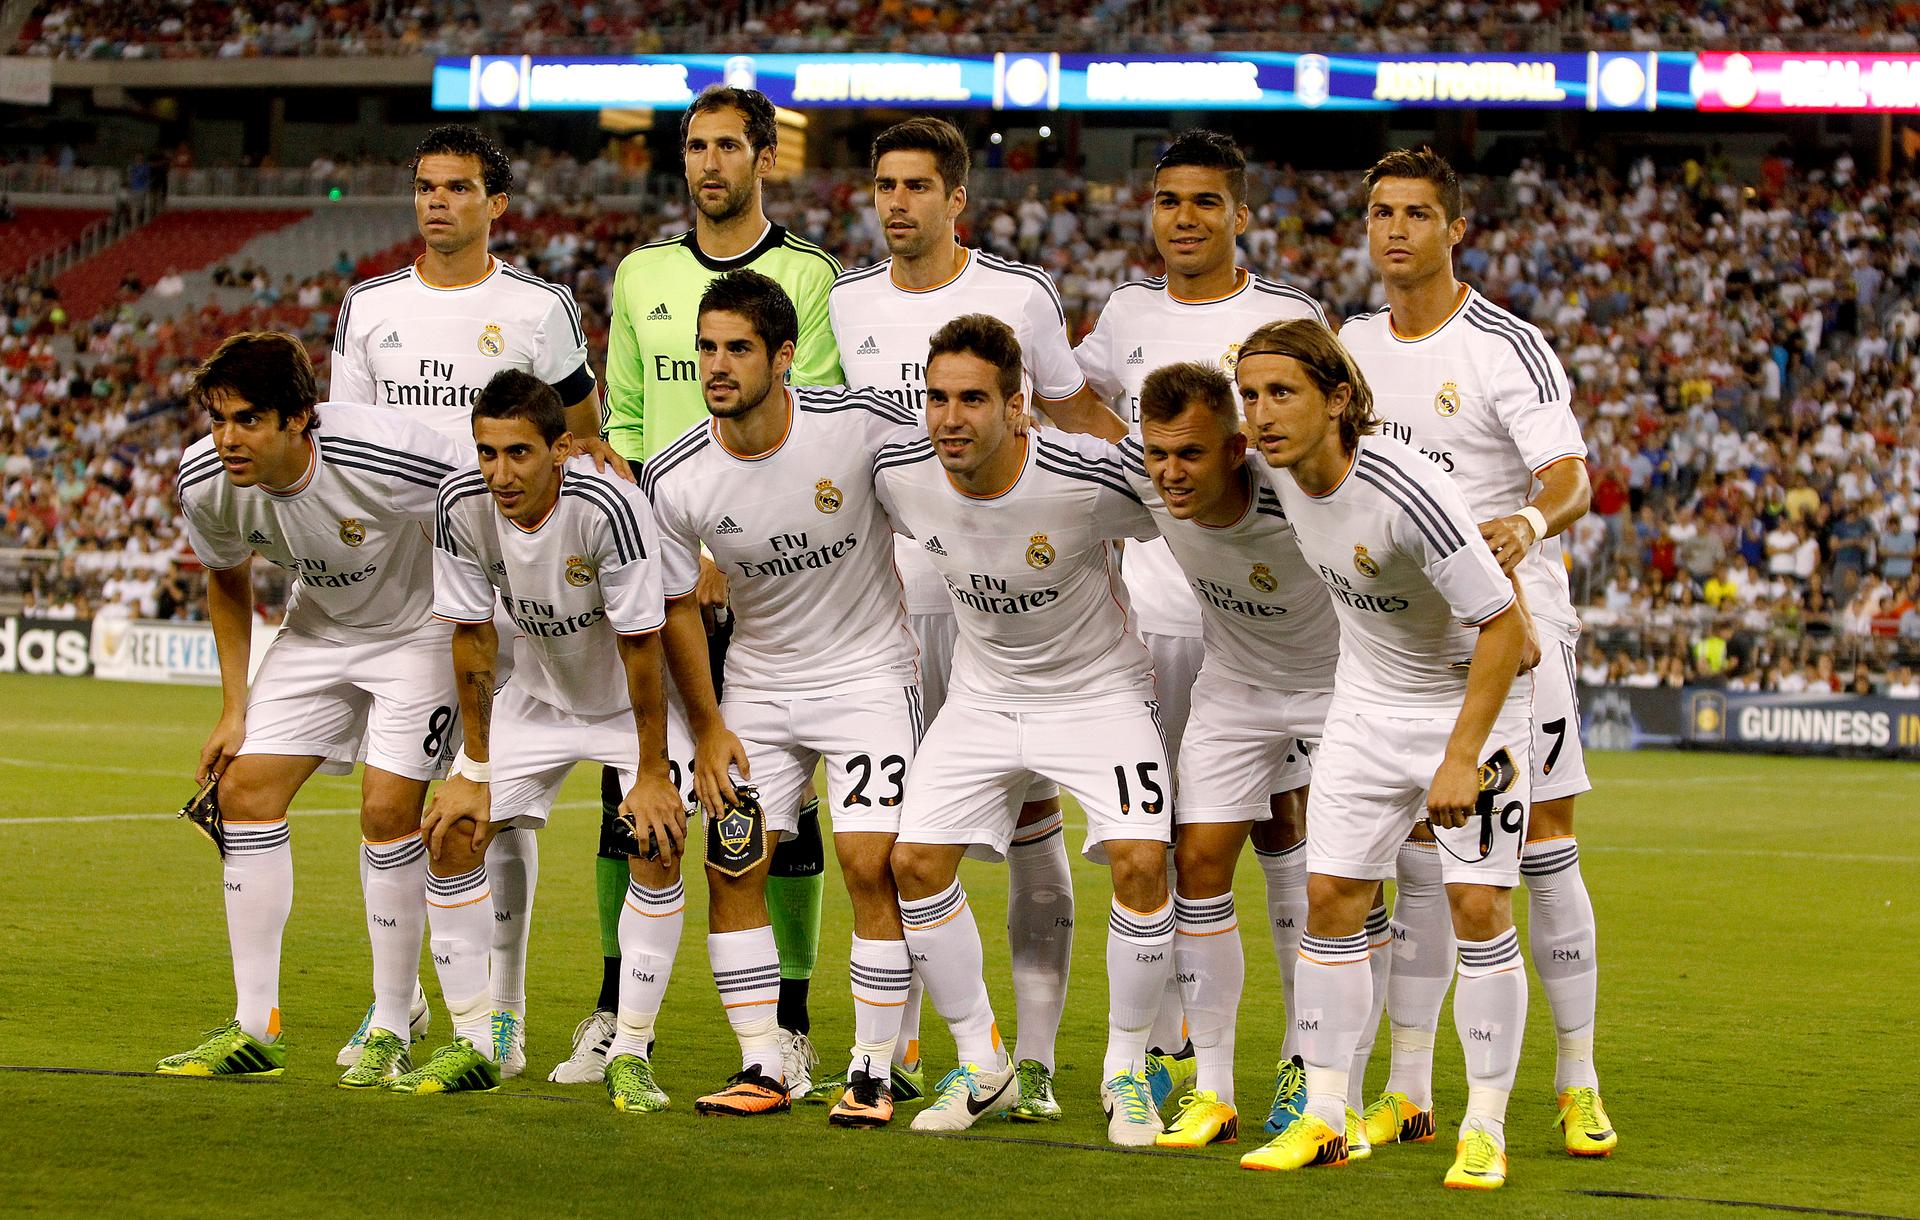 The Real Madrid team pose for a team photo in August 1, 2013.